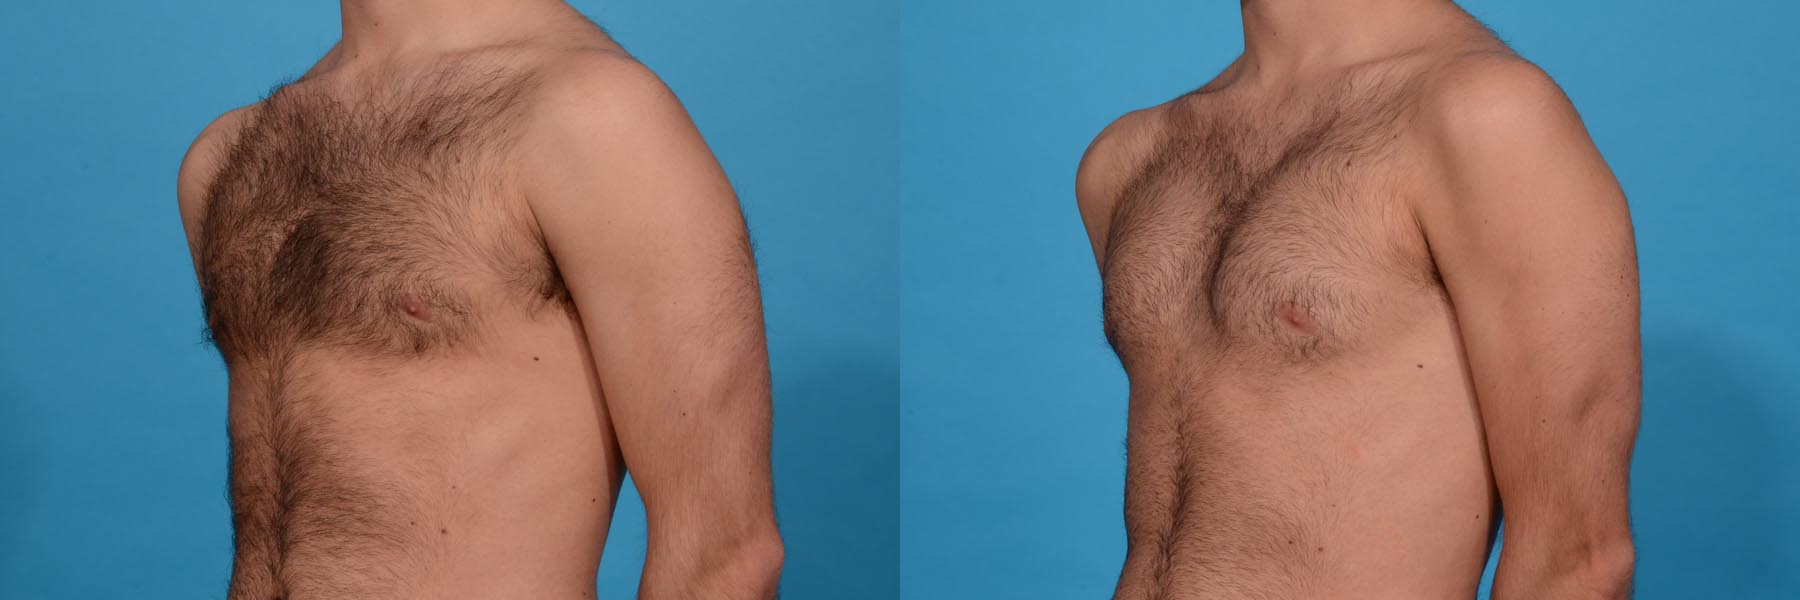 Chest Contouring with Pectoral Augmentation Before and After Photo by Sculpt Aesthetic Center in Frisco, TX